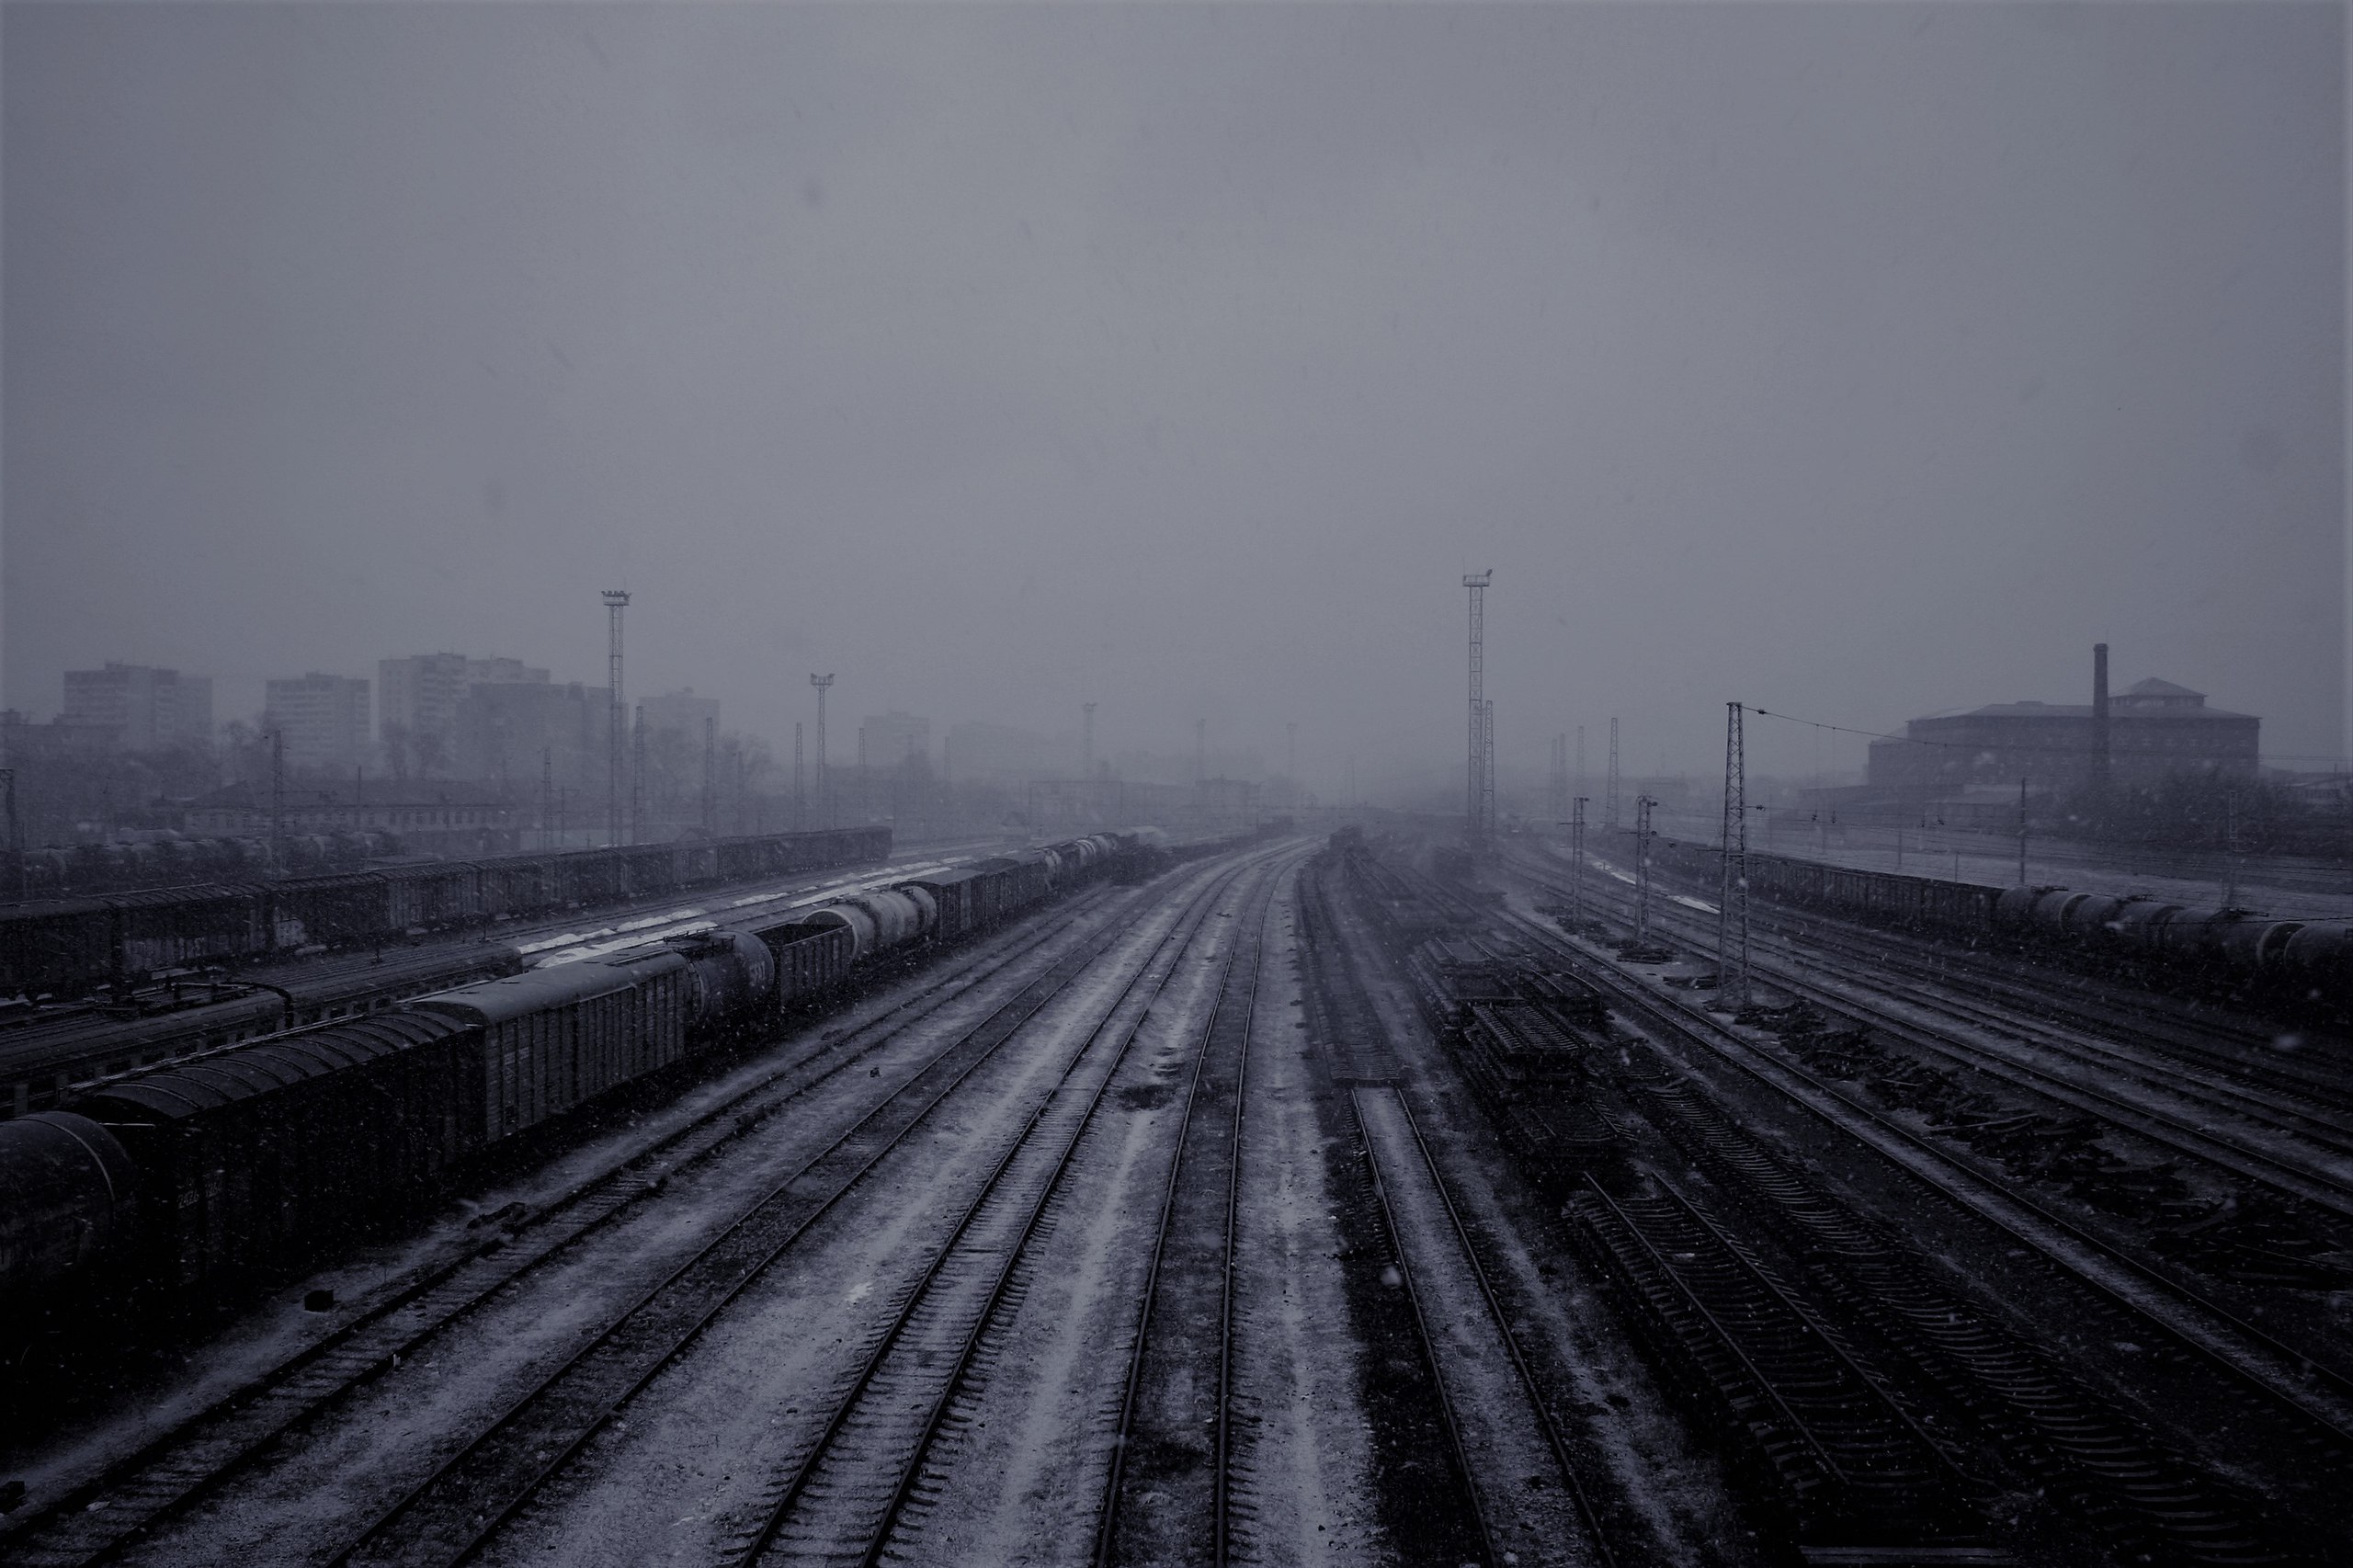 Train Winter Mist Loneliness Russia Railway City House Faded Morning 2560x1706